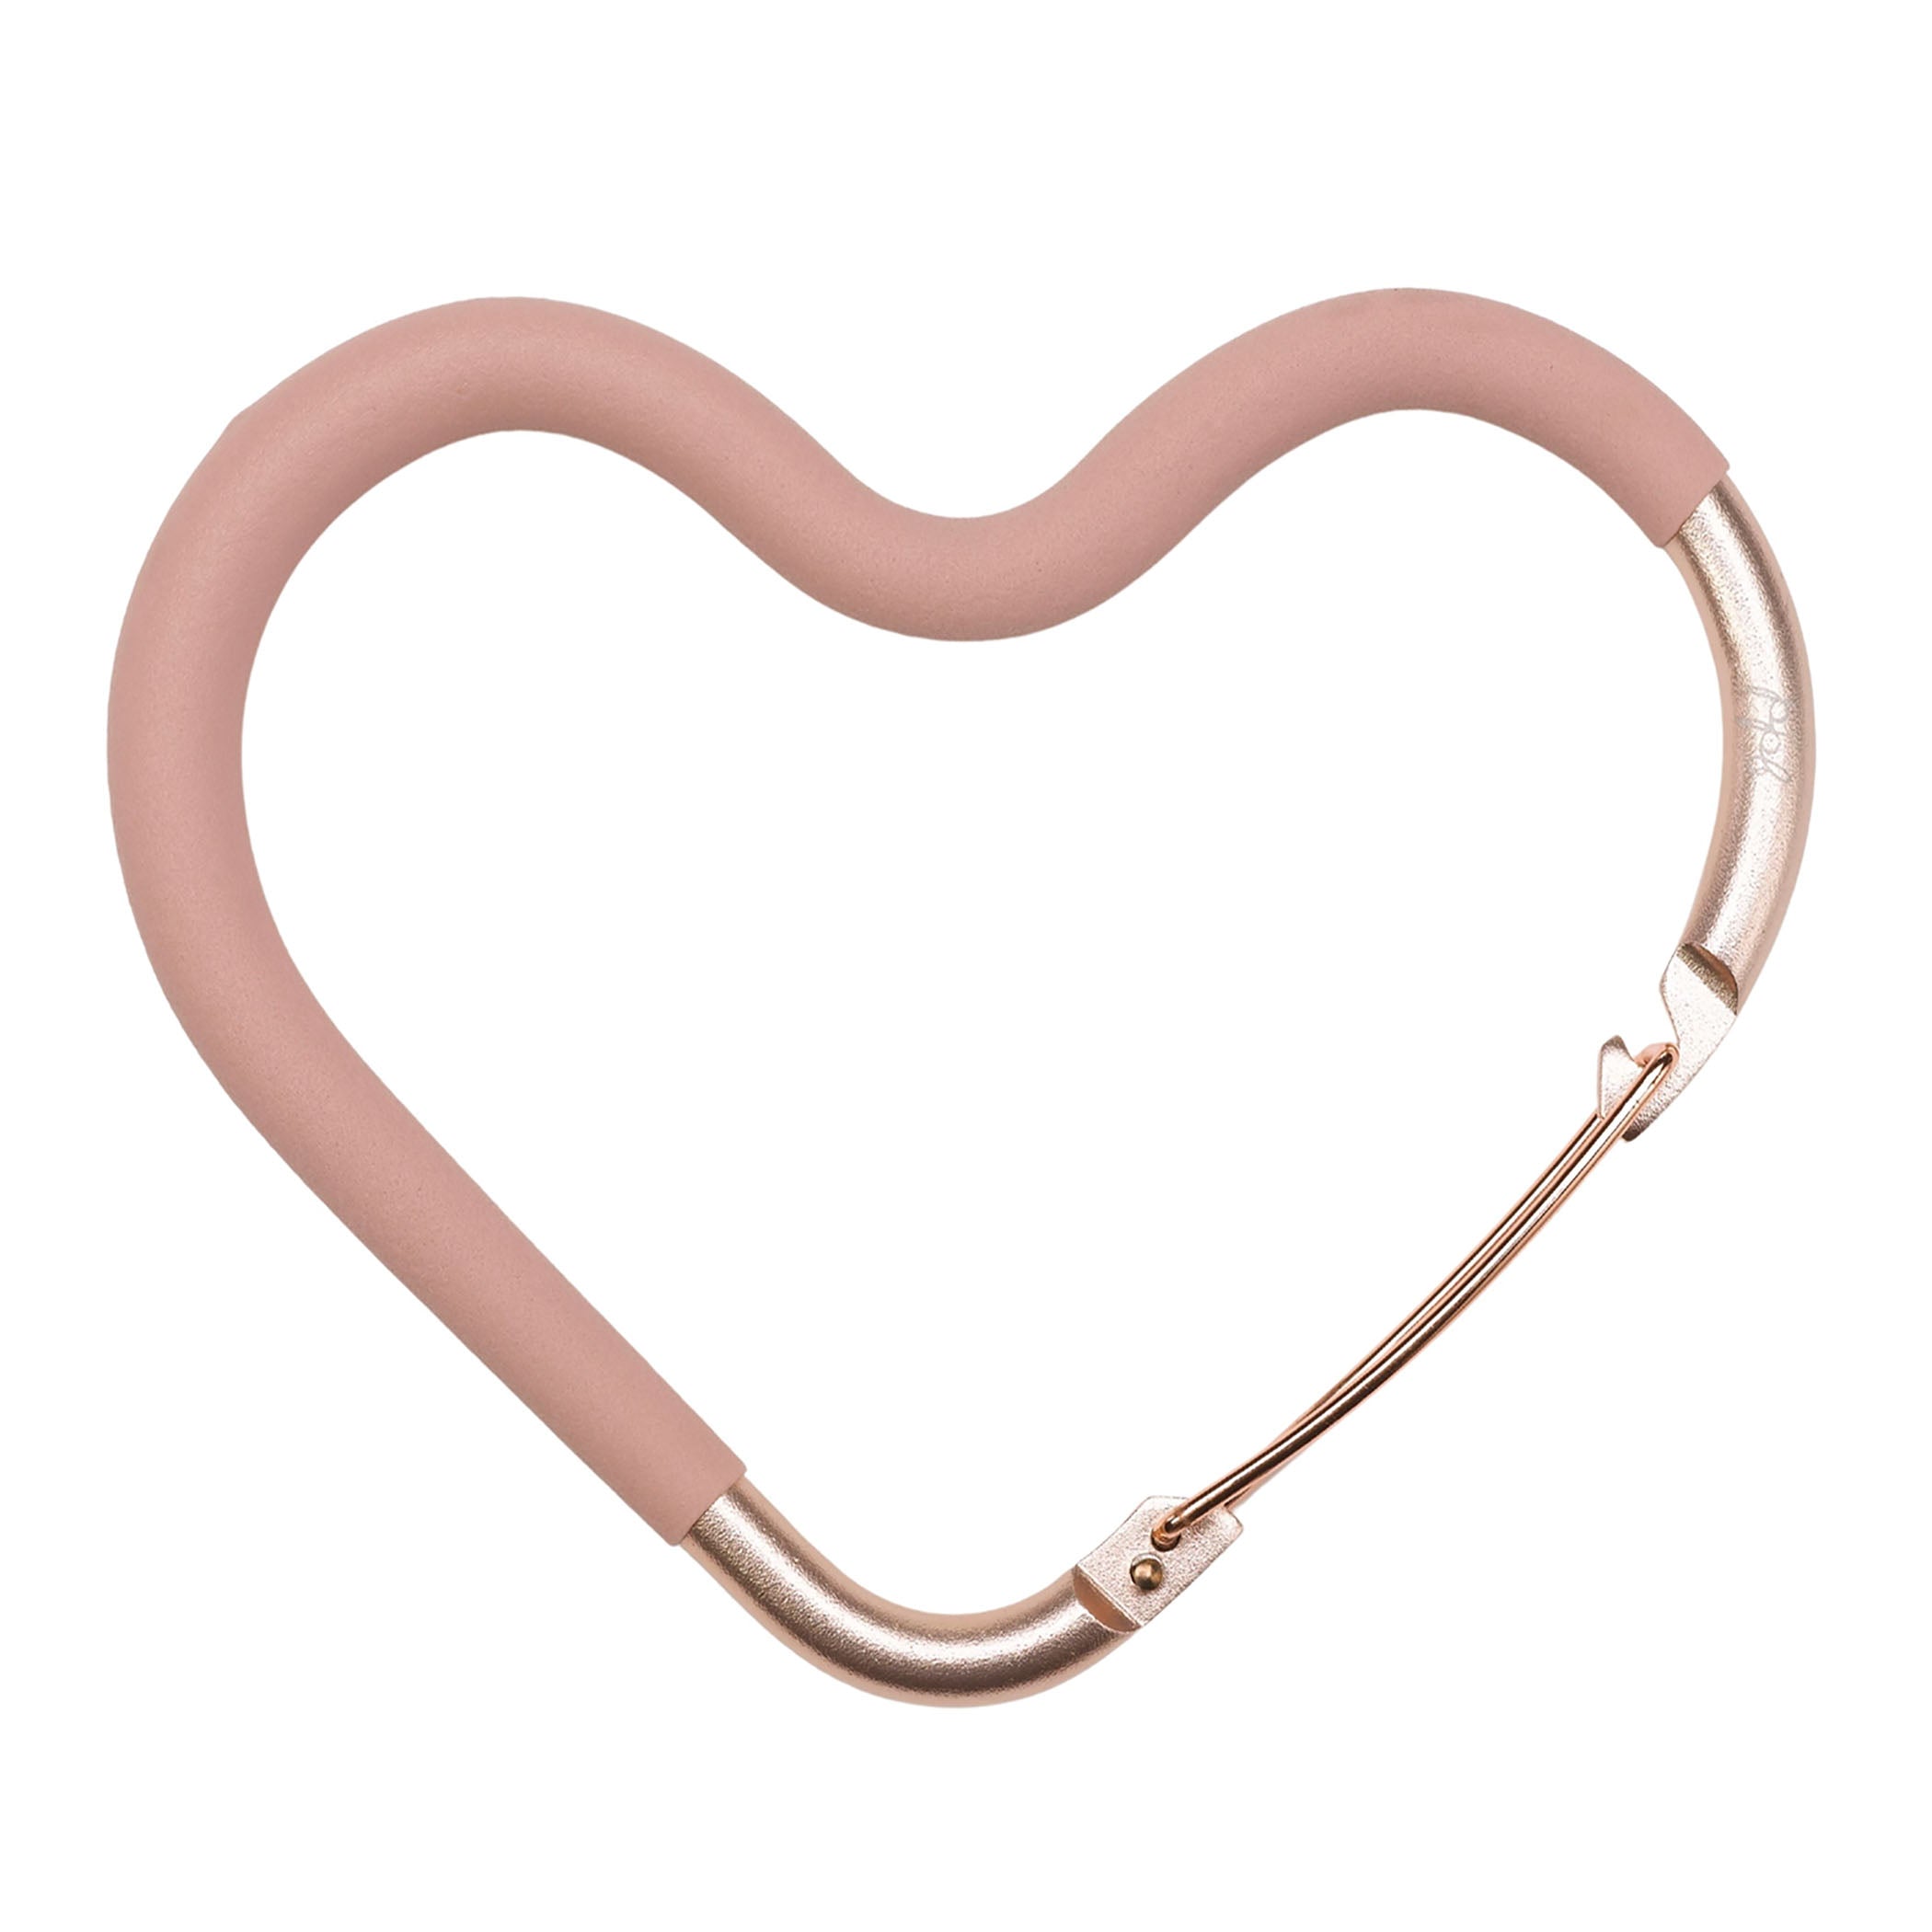 Petunia Pickle Bottom Oh My Heart Universal Stroller Hook in Blush/Rose Gold